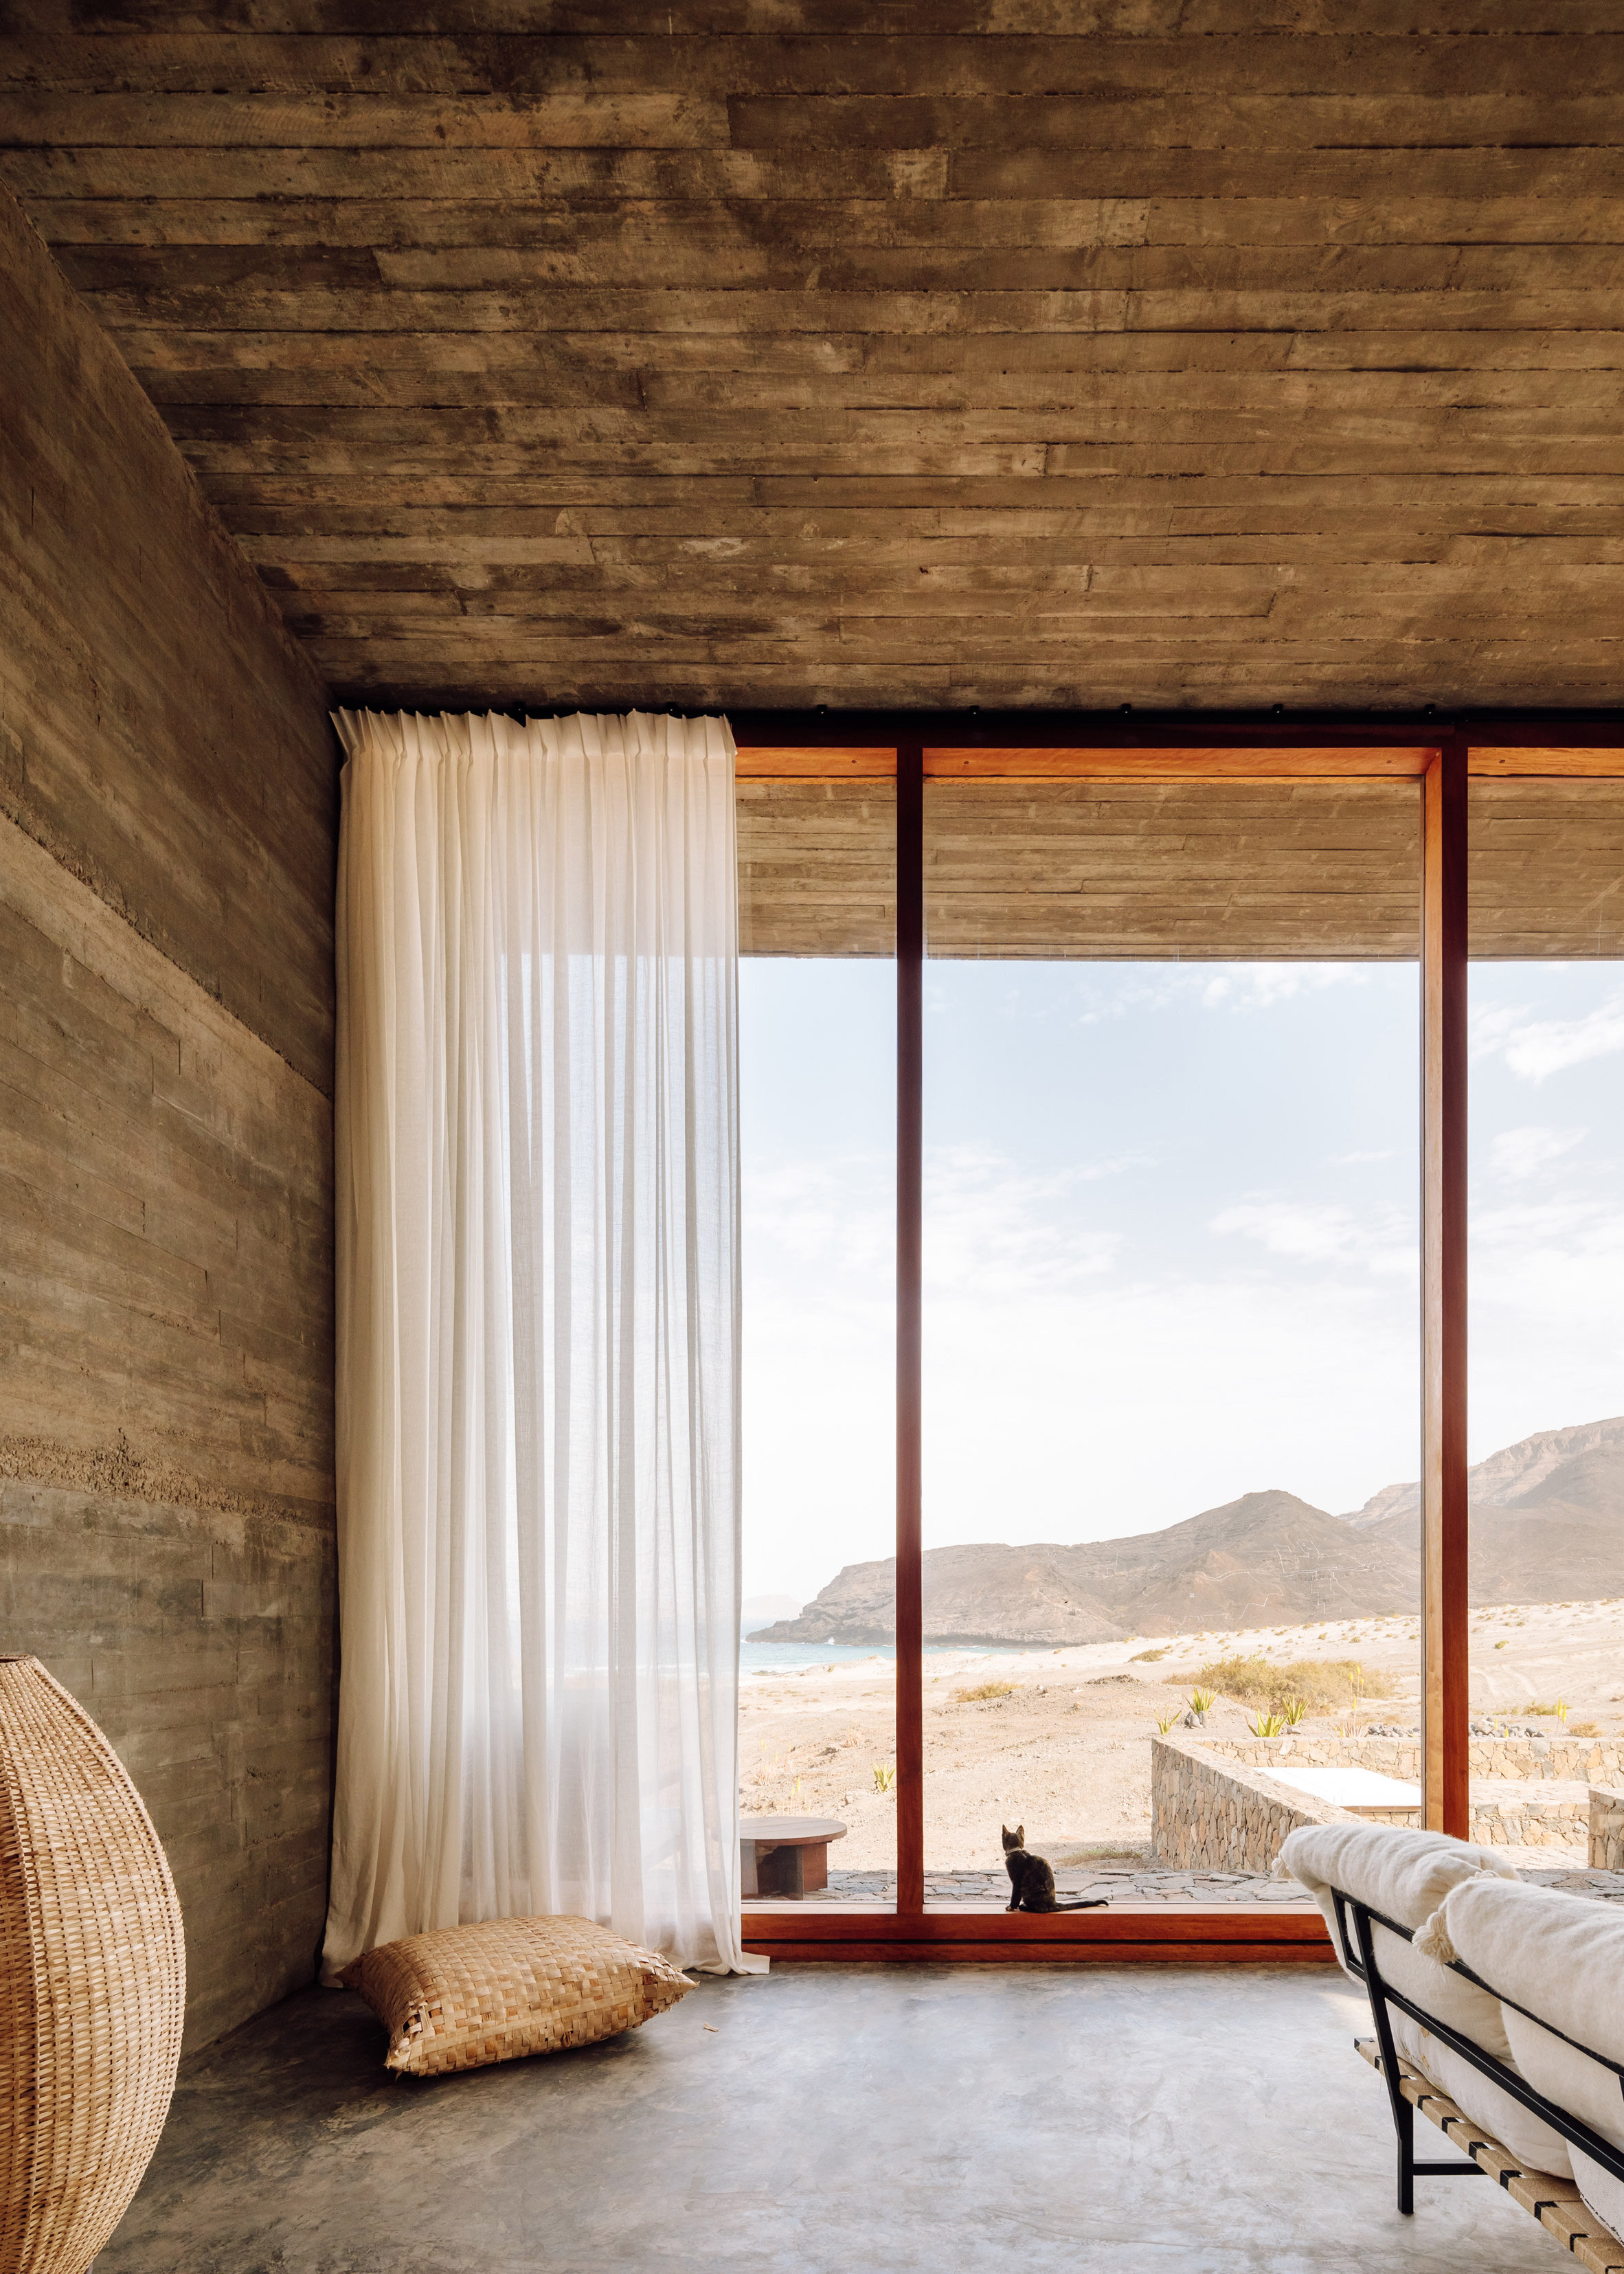 Barefoot Luxury hotel in Cape Verde by Polo Architects and Going East